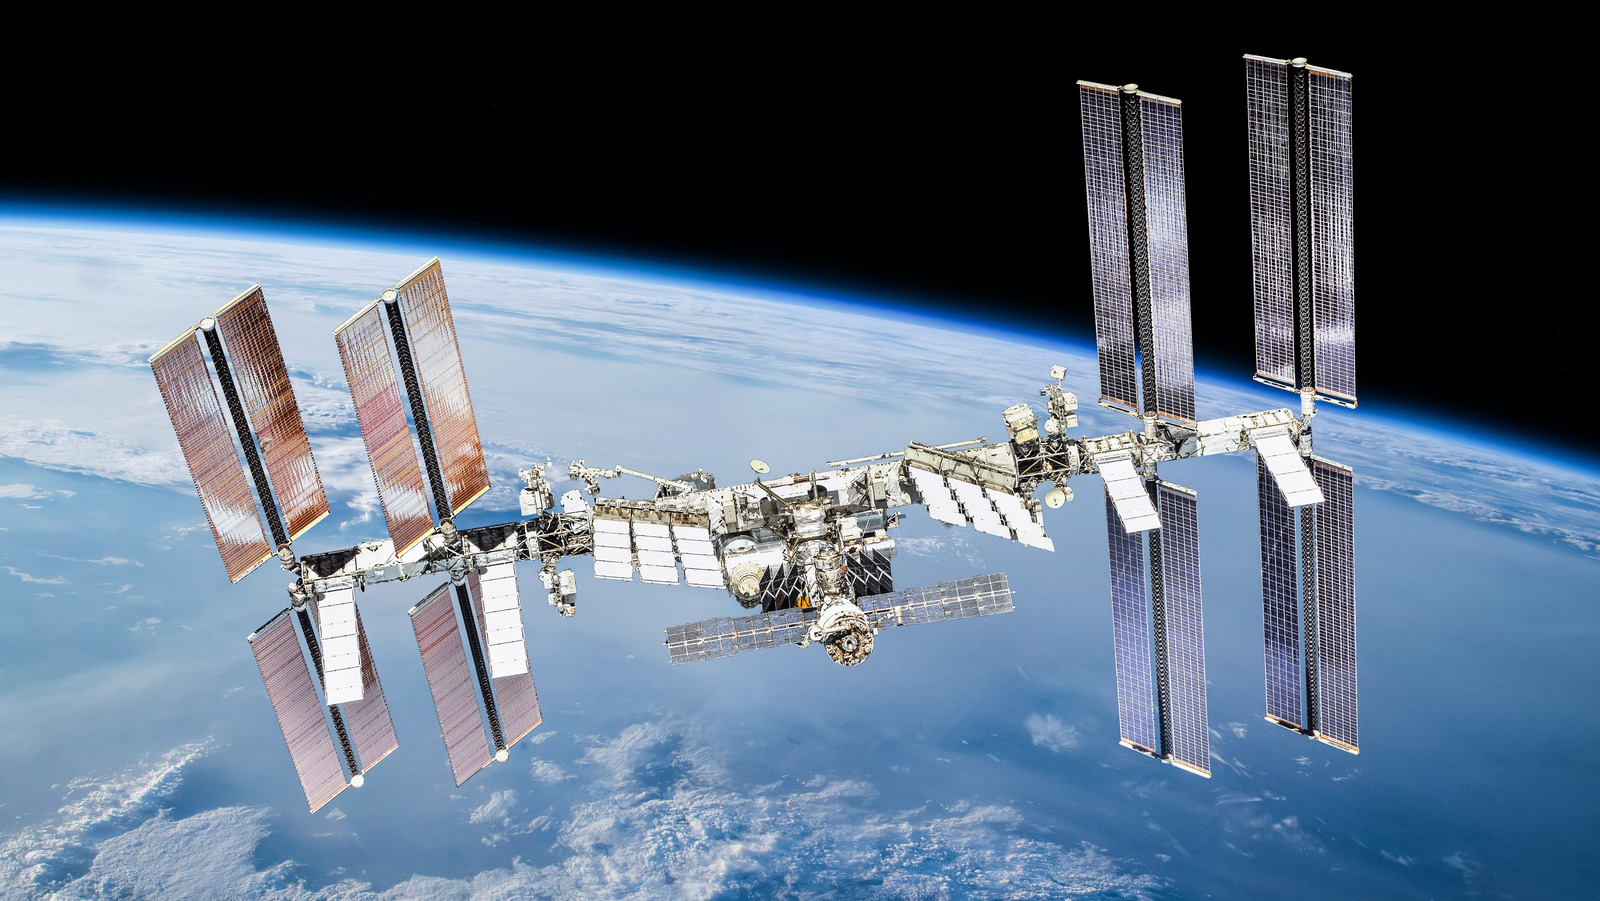 10 things you didn't know about the famous Mir space station